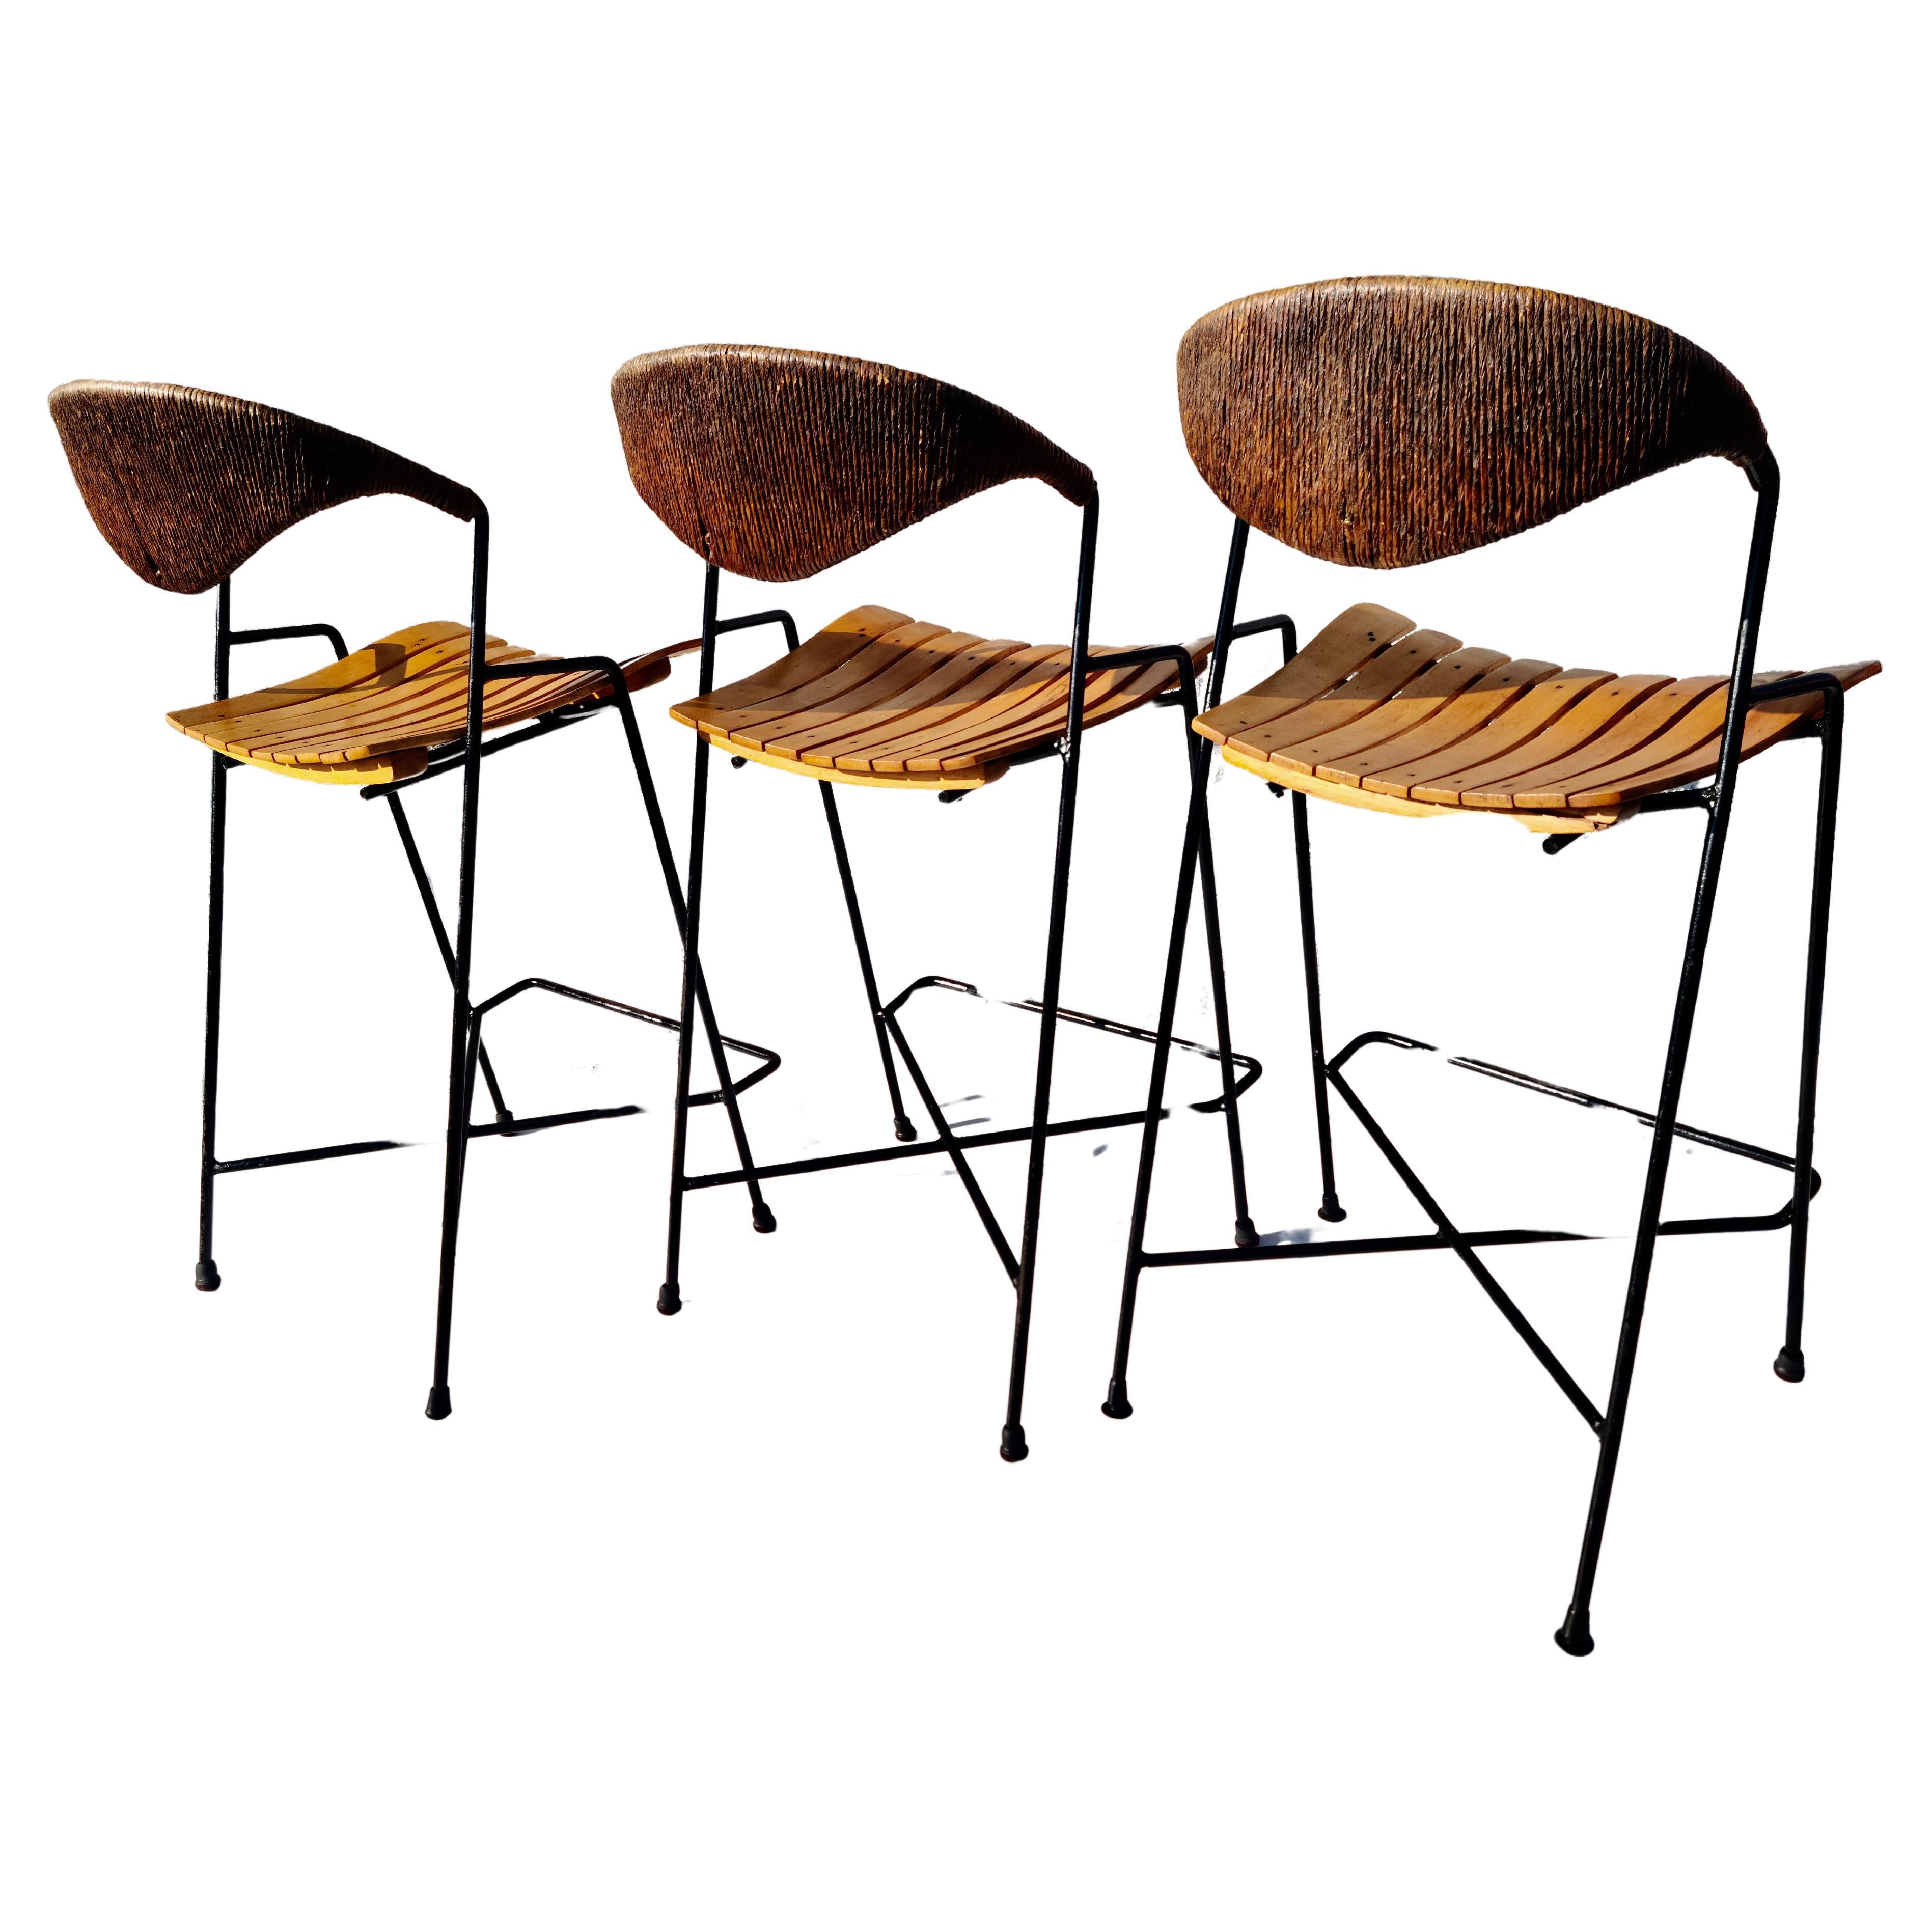 Set of 3 Barstools by Arthur Umanoff for Raymor In Good Condition For Sale In Fraser, MI